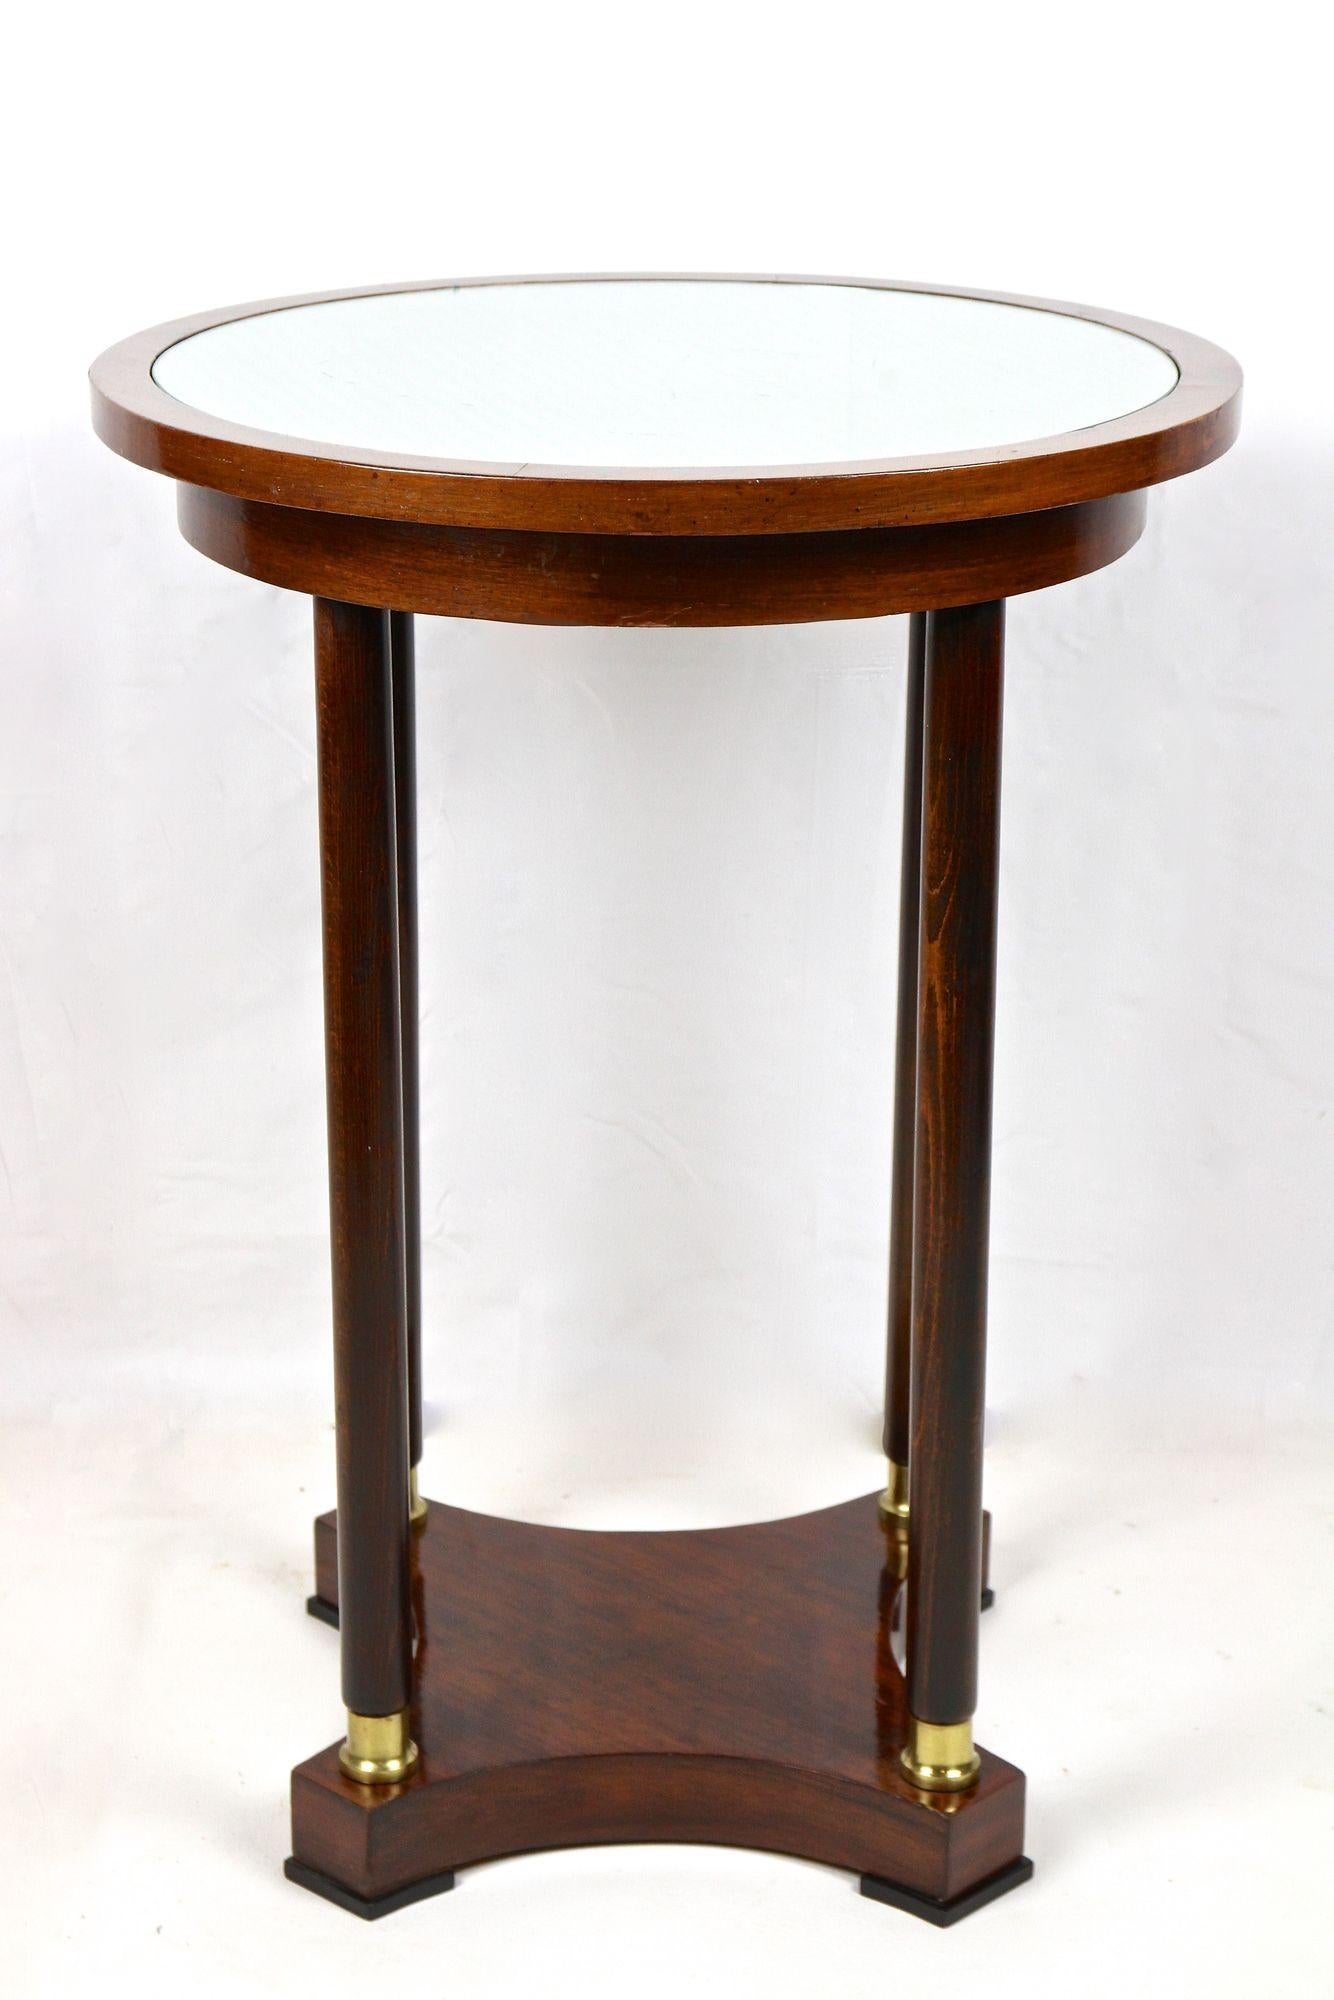 Exquisite Art Nouveau side table/ coffe table from the famous Vienna secession period around 1905 in Austria. This fantastic side table was made of beech and trimmed to a beautiful nut wood look. The round top plate floats on four delicate beech